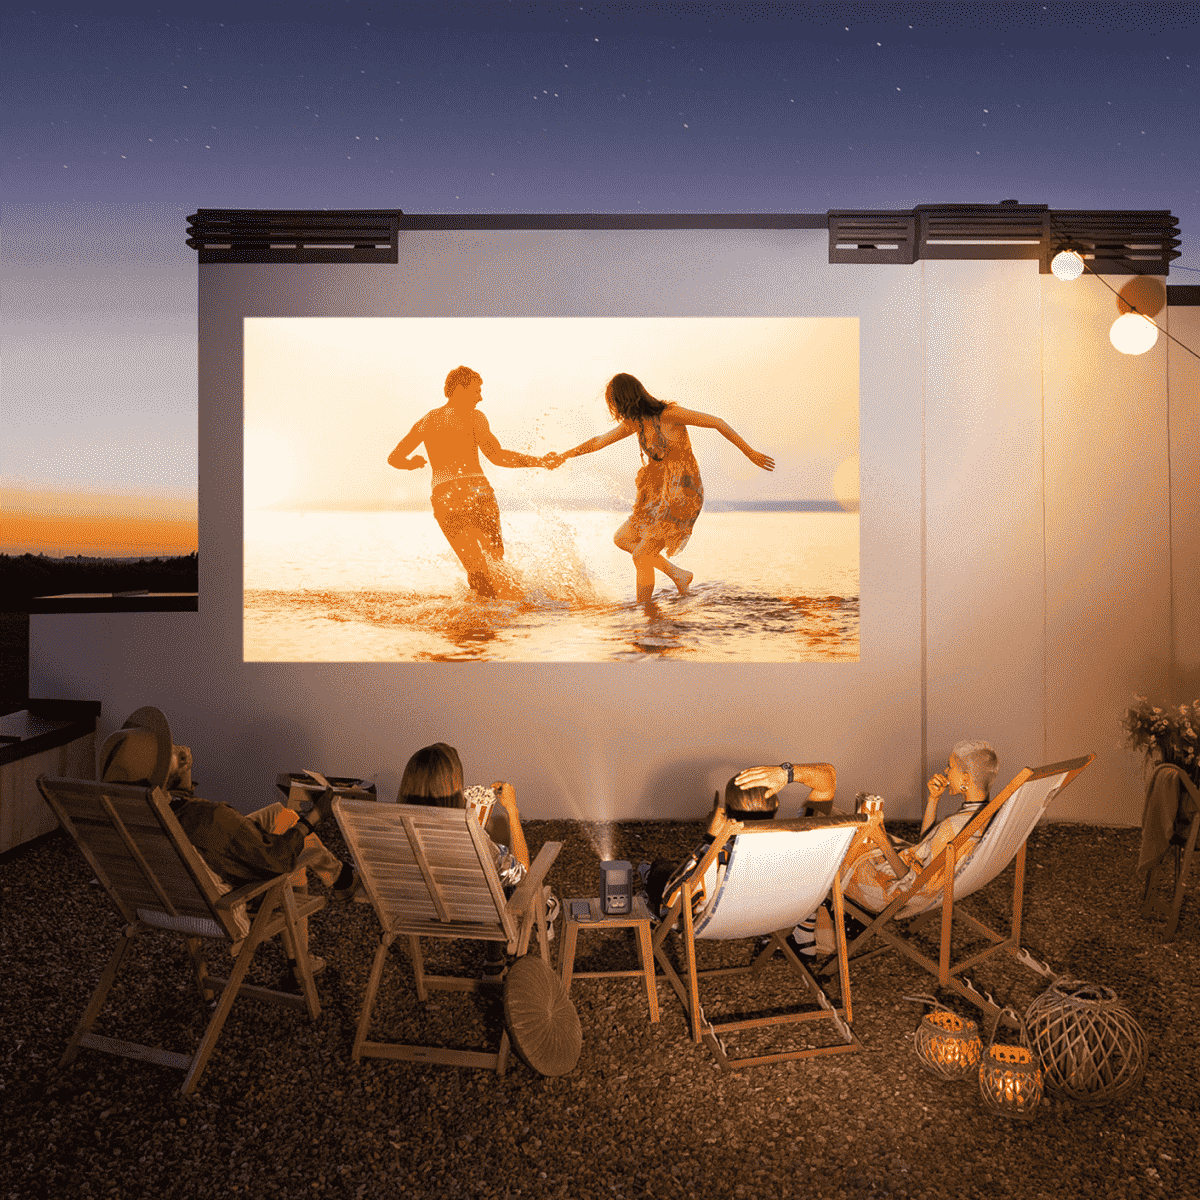 Four Benefits to Have a Bluetooth Outdoor Movie Projector for Summer Nights